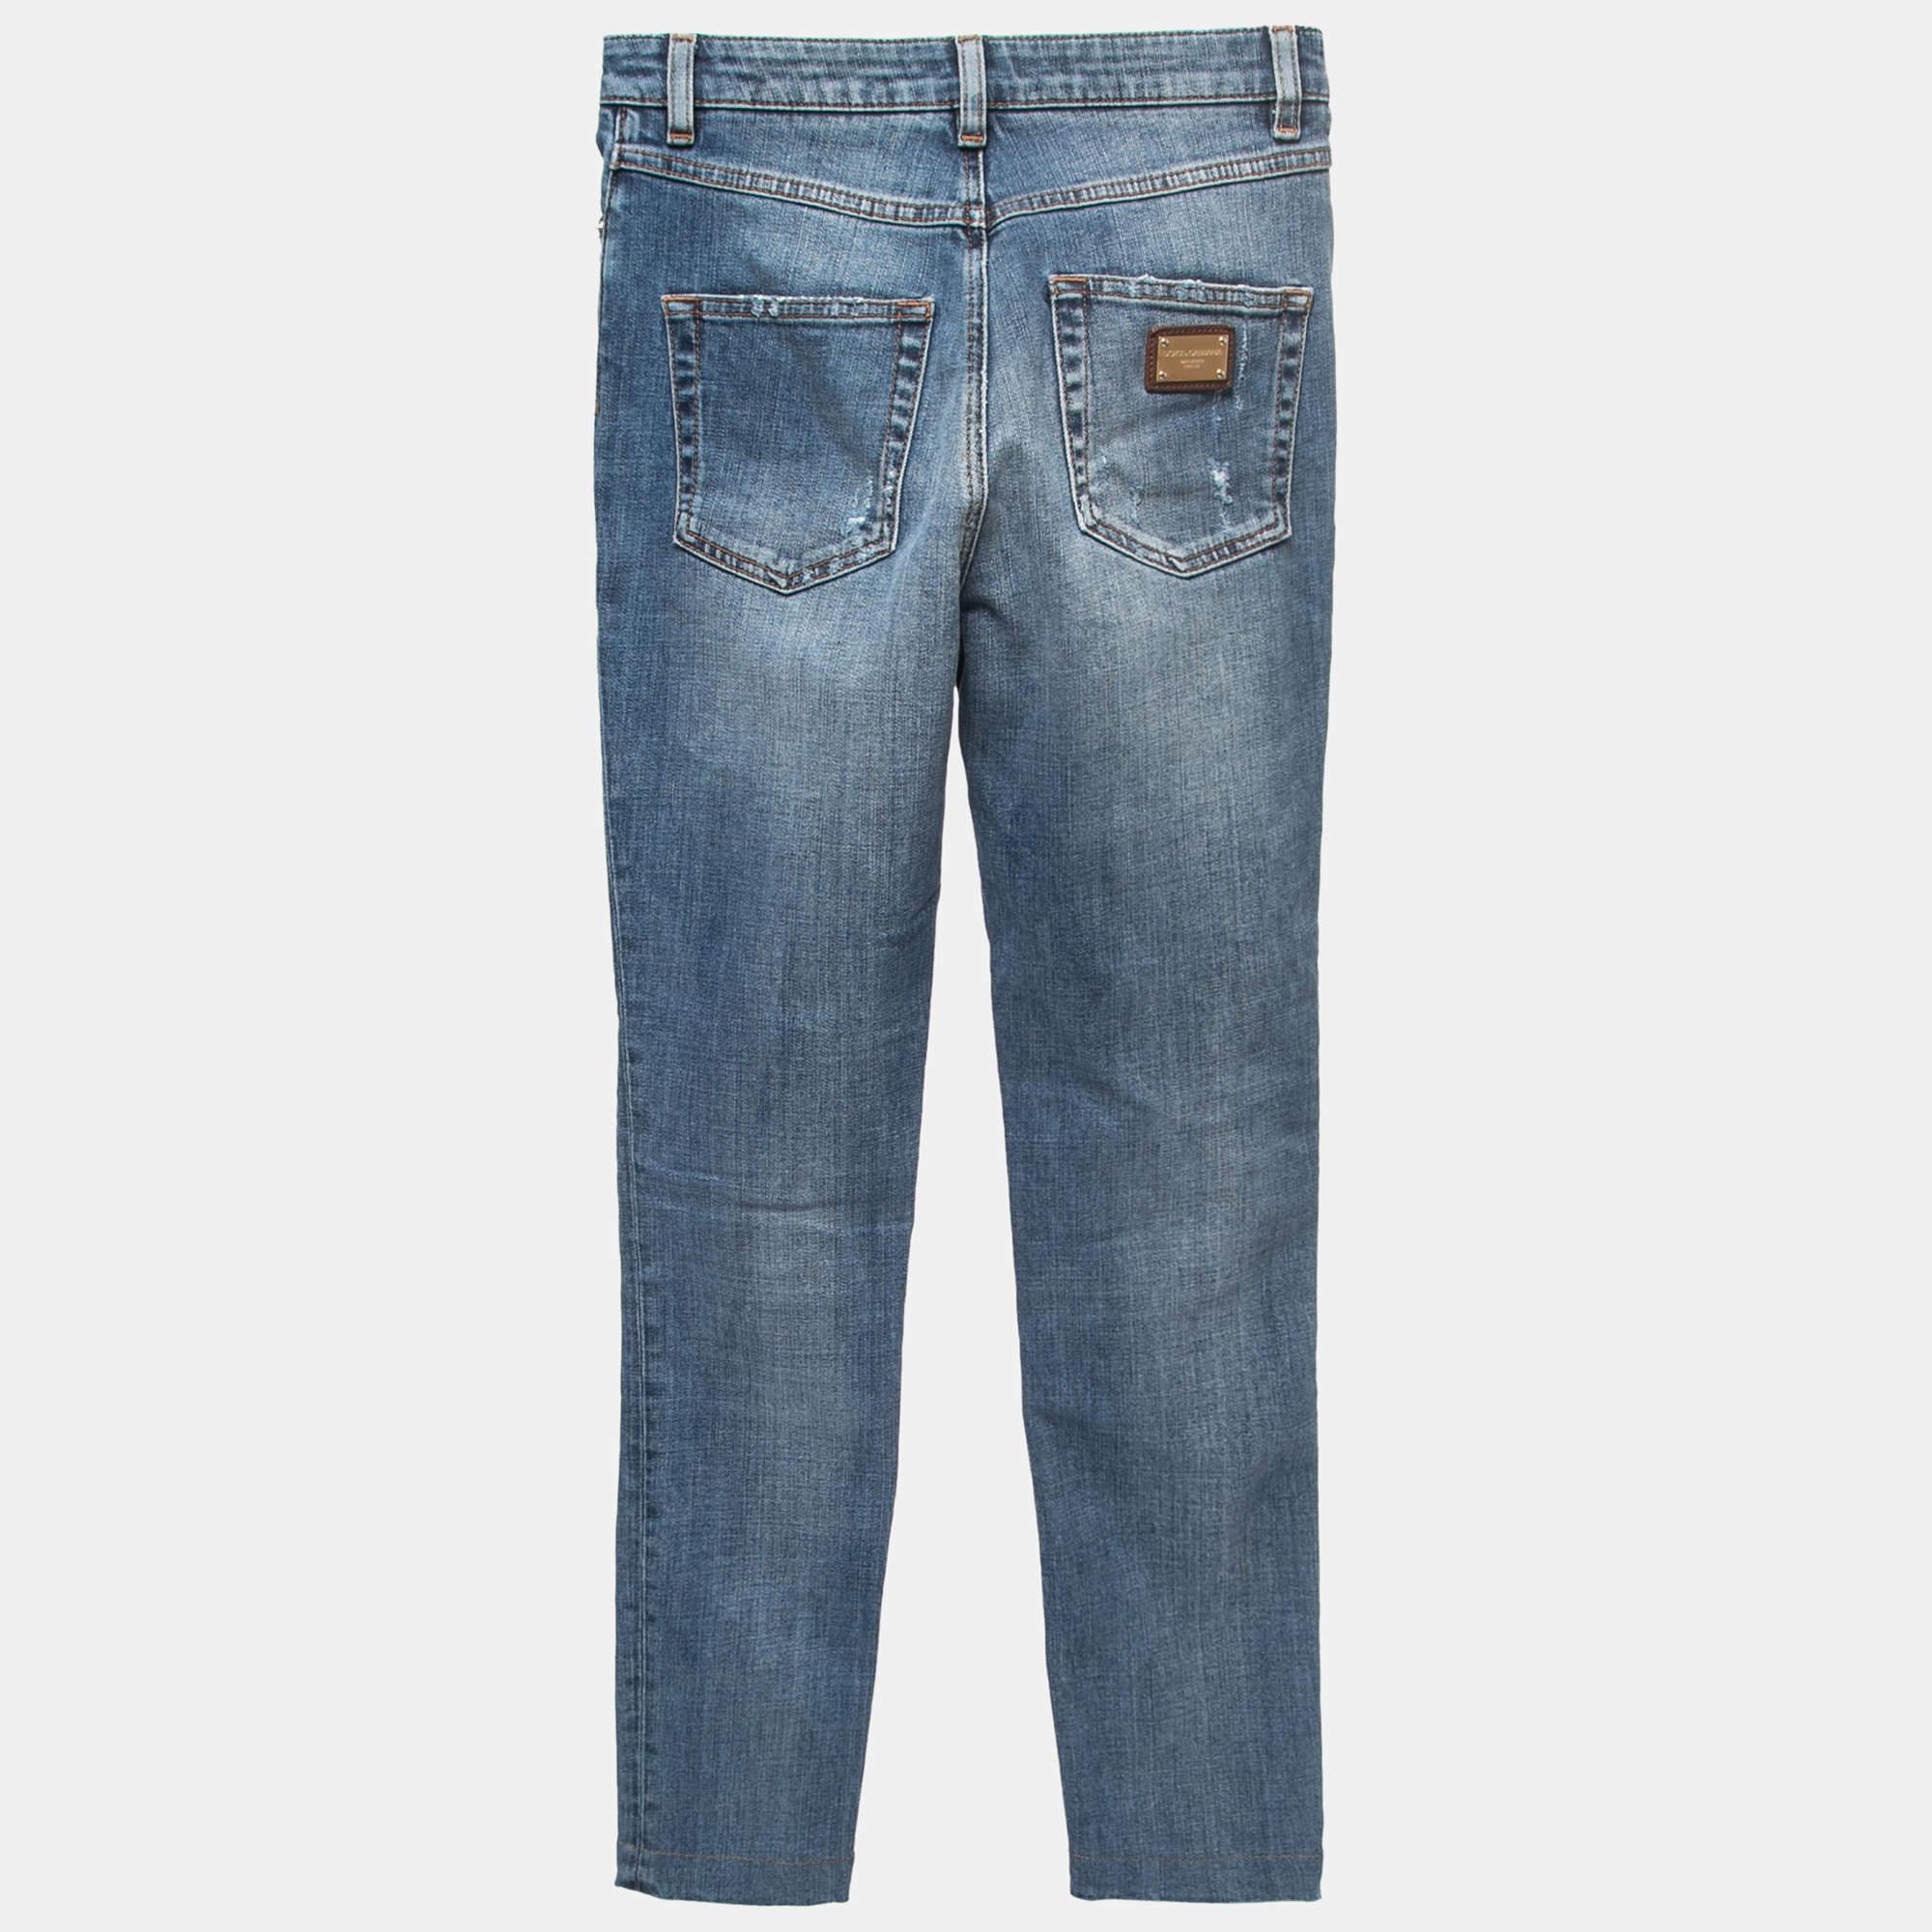 These Dolce & Gabbana jeans are a must-have wardrobe essential. These blue skinny jeans can be dressed both up and down for looks that are either casual and comfy or chic and fashionable.

